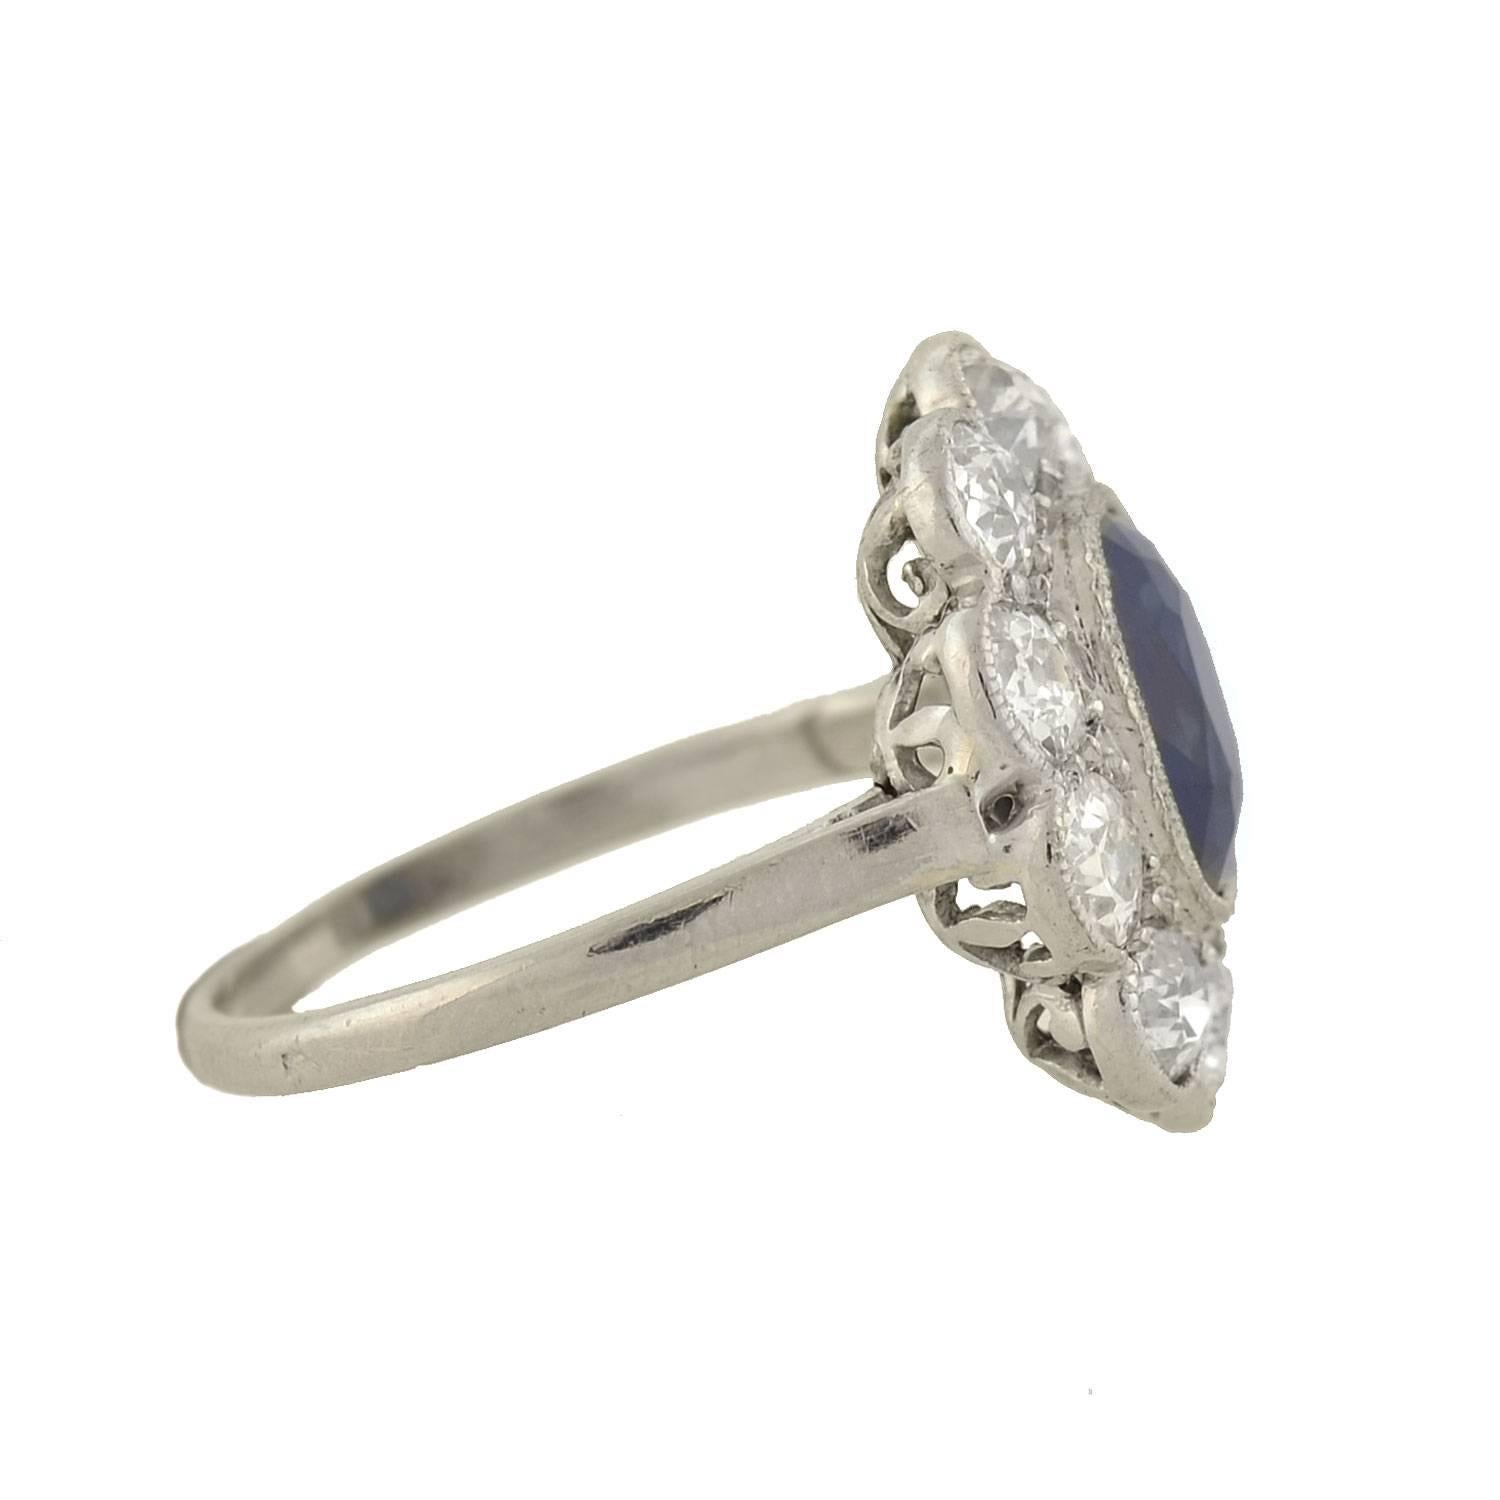 An absolutely gorgeous sapphire and diamond ring from the Art Deco (ca1920) era! This beautiful piece is crafted in platinum and features a 2.00ct sapphire at the center of a diamond encrusted frame. Encircling the sapphire is a scalloped milgrained